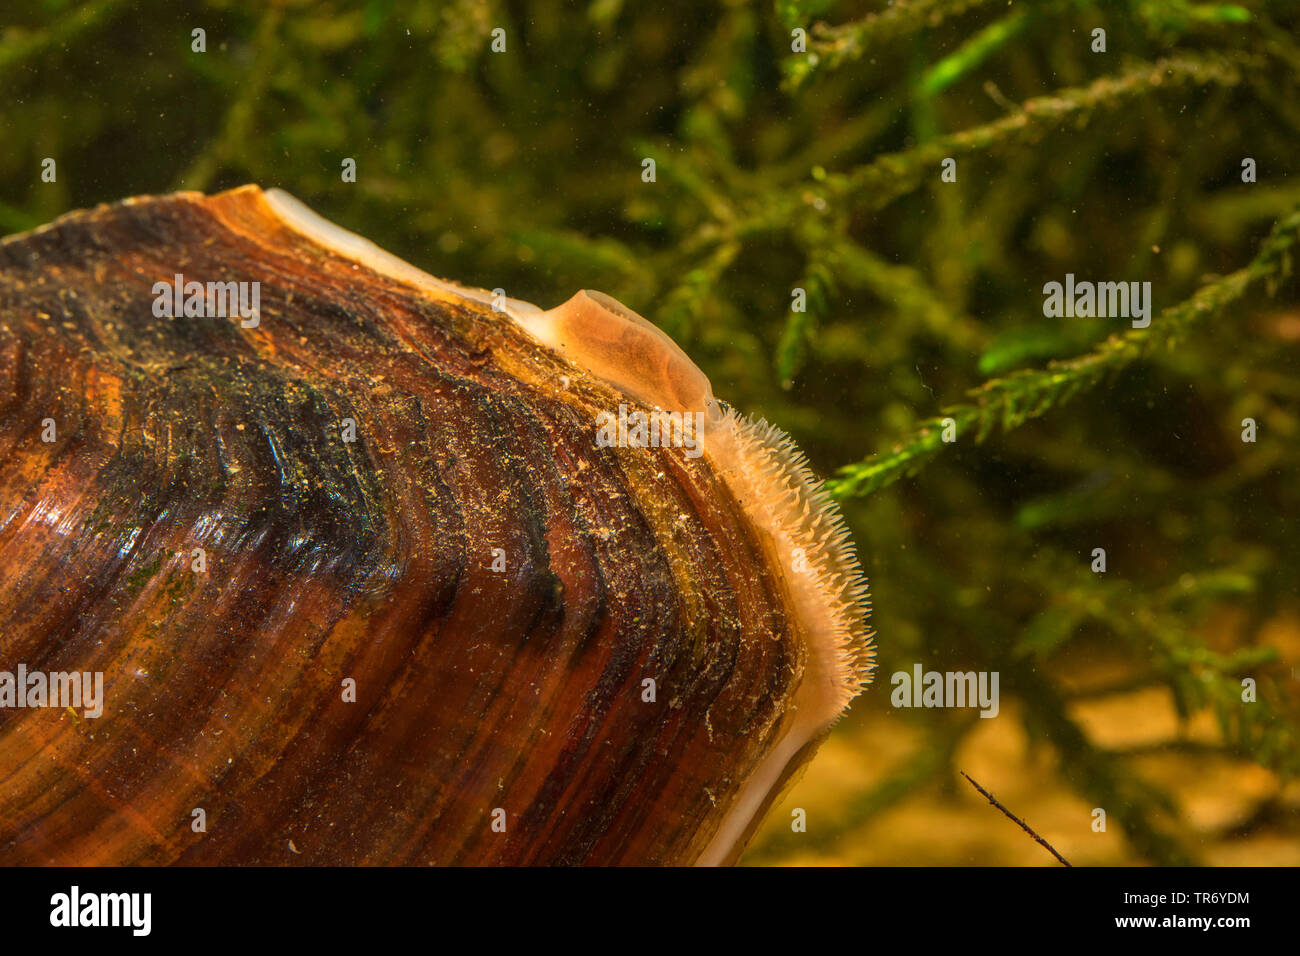 swan mussel (Anodonta cygnea), detail with in and out siphons, Germany Stock Photo